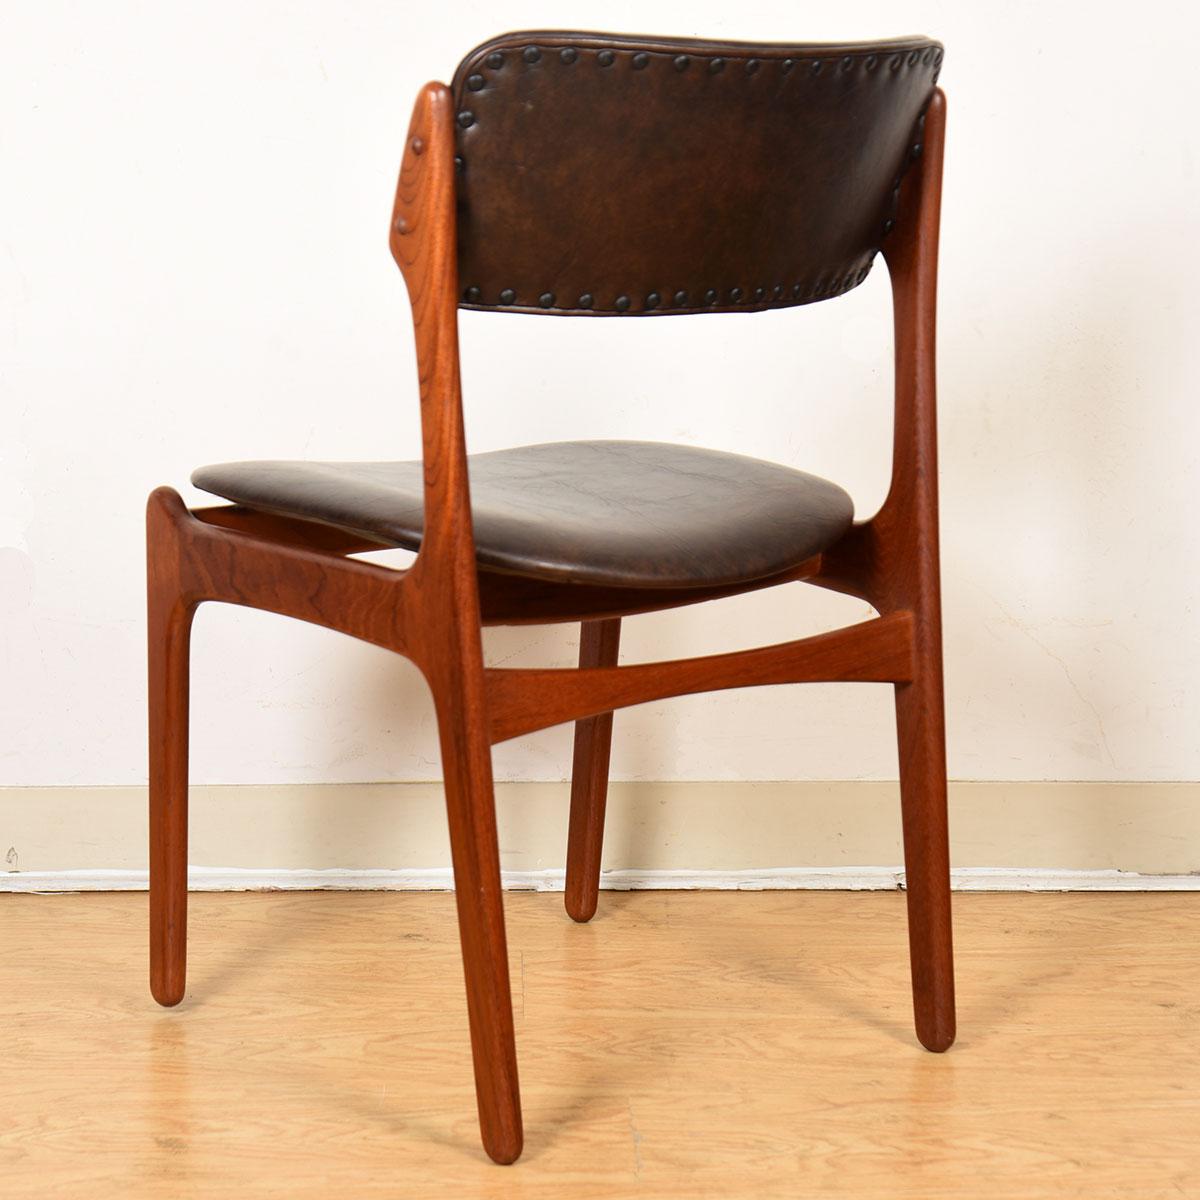 Pair of Danish Teak Dining Chairs in Chocolate Brown by Erik Buch For Sale 2